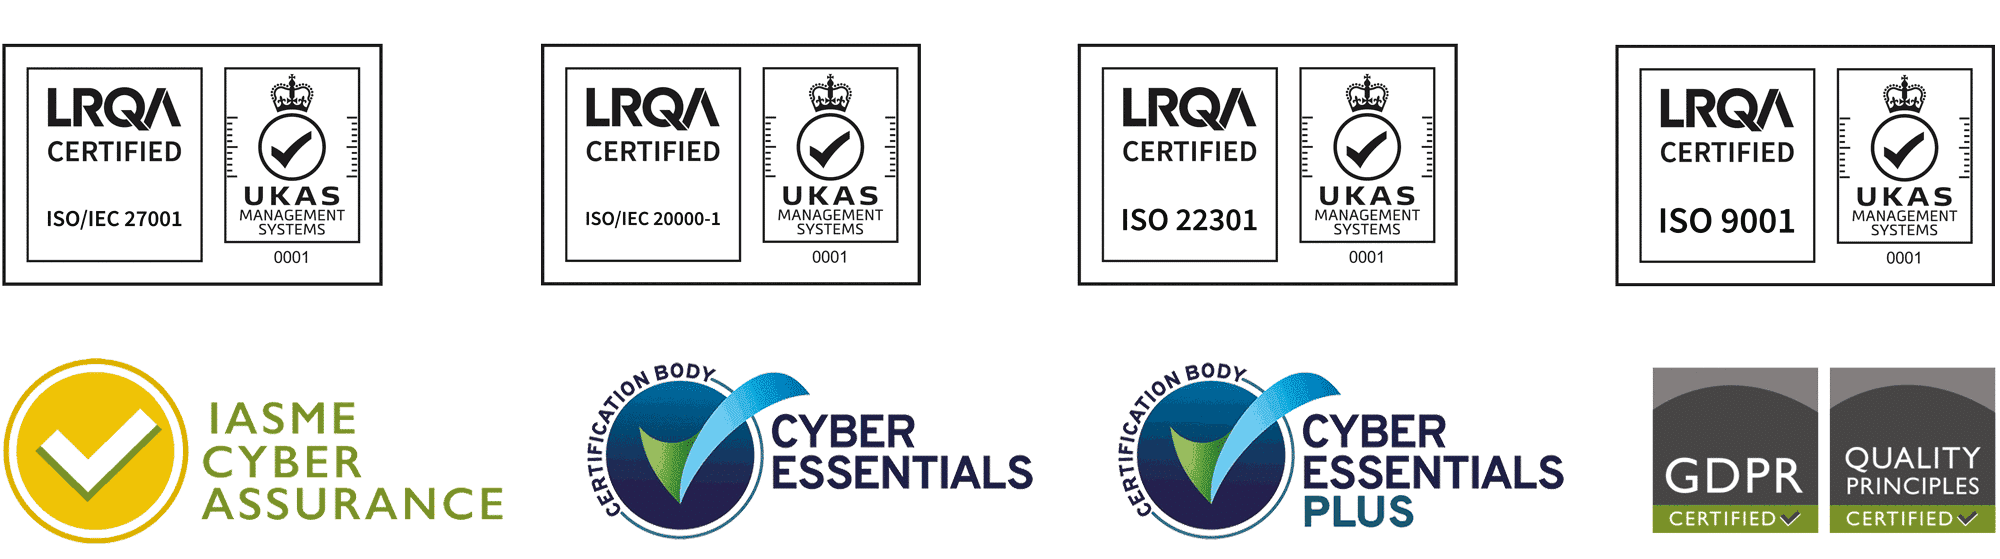 Acora certifications and accreditations